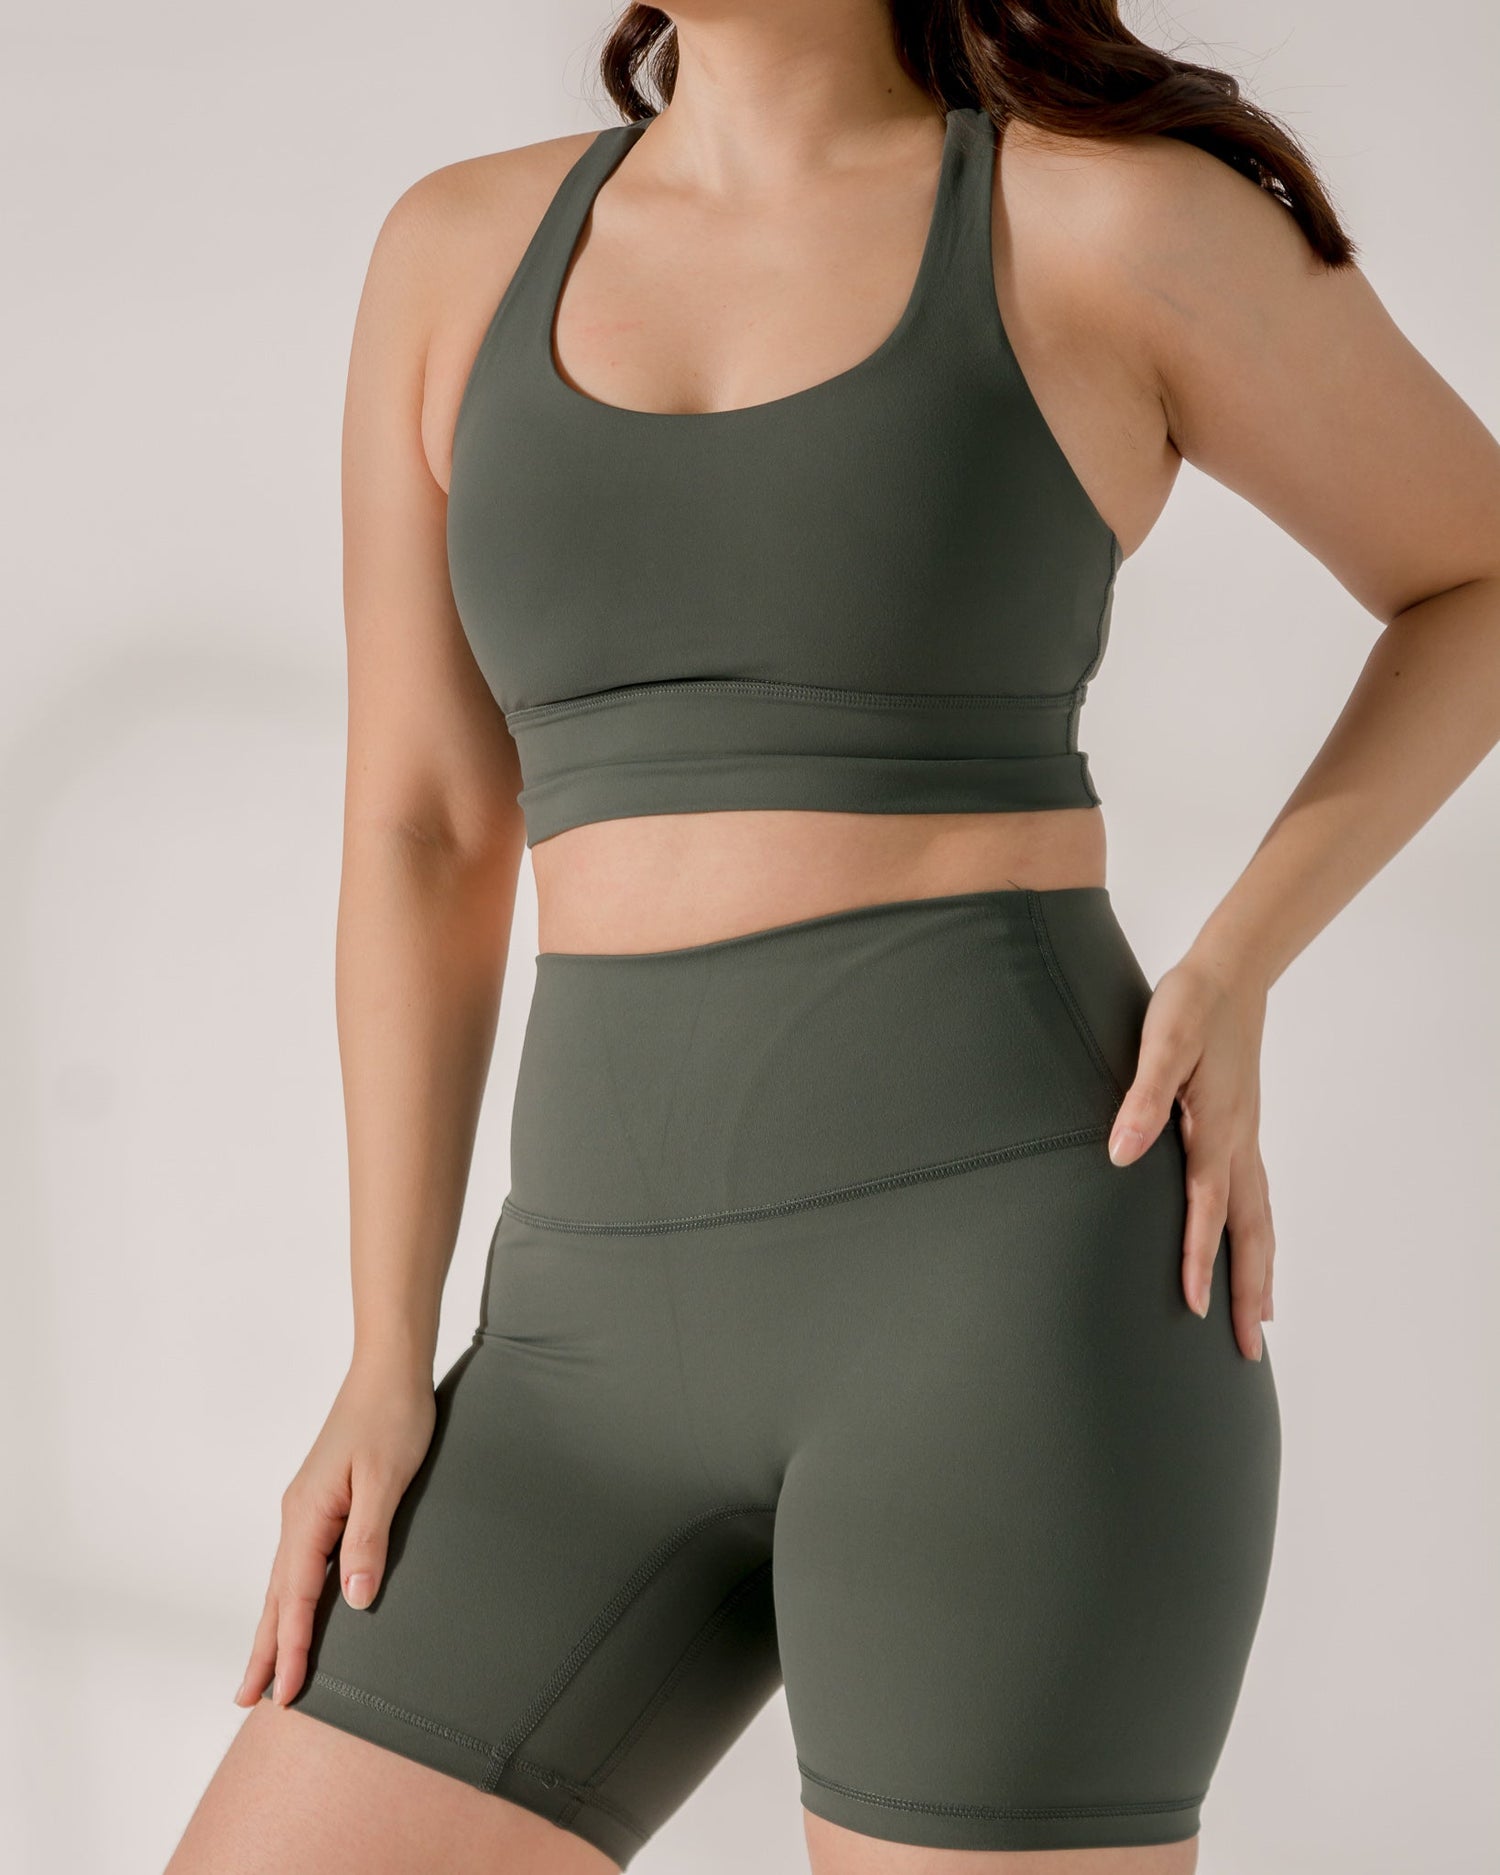 Train shorts in Pine - New Day Activewear